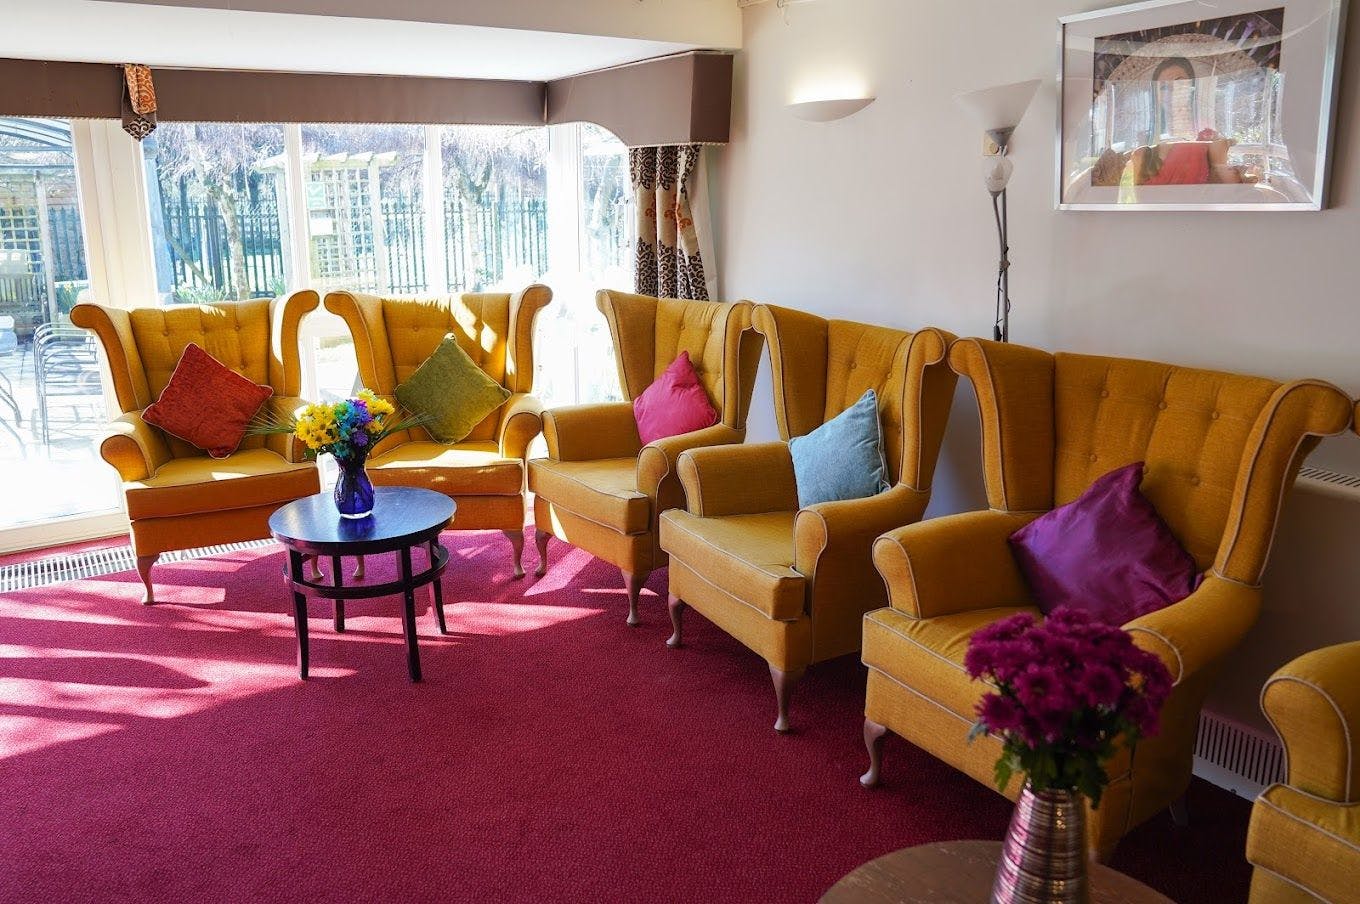 Communal Area at Asra house care home Leicester, Leicestershire